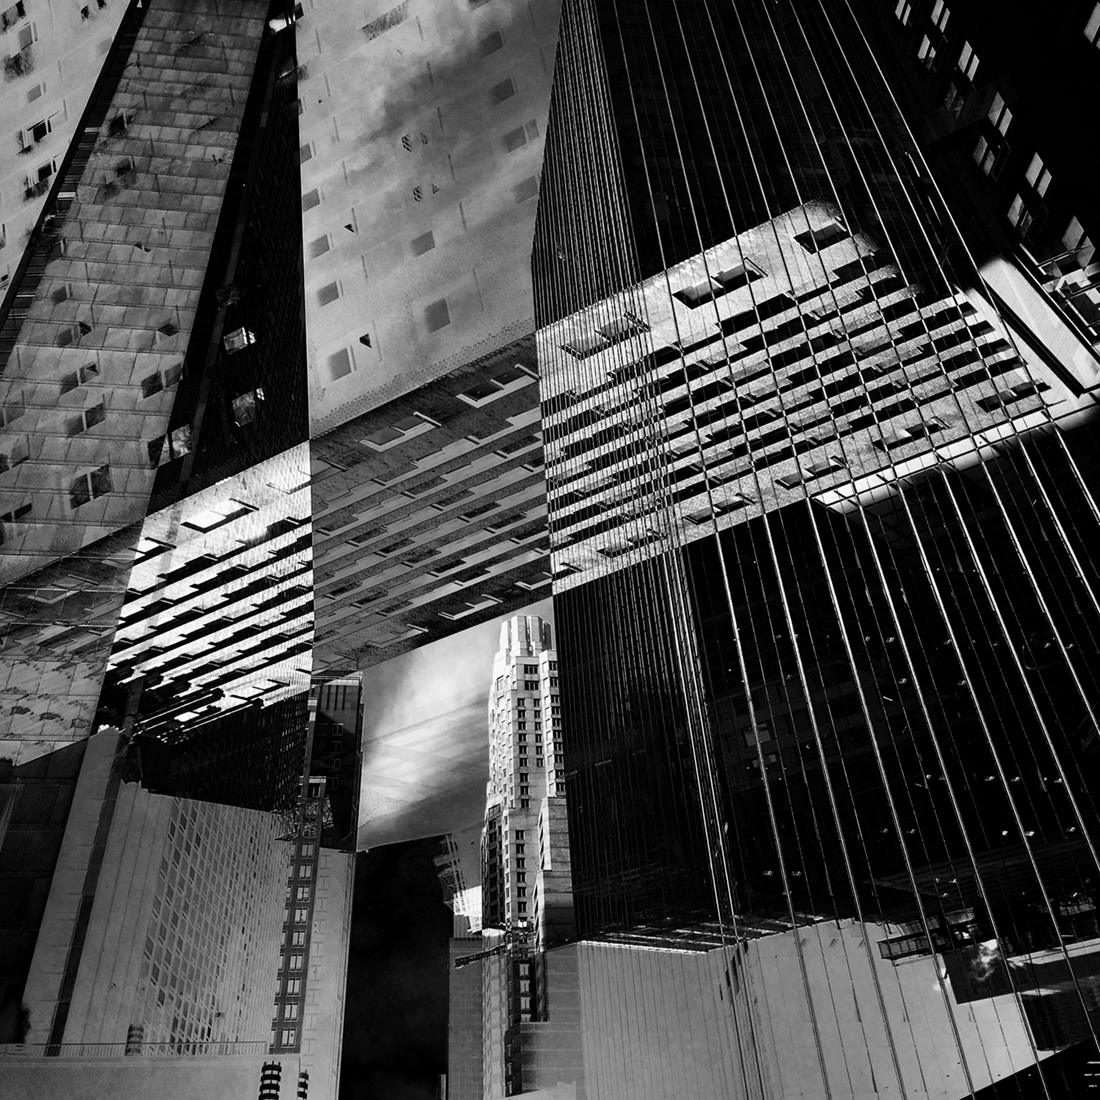 1ST PLACE - Black & White Architectural PHOTO of the Year 2019, Midtown - Trevor Messersmith